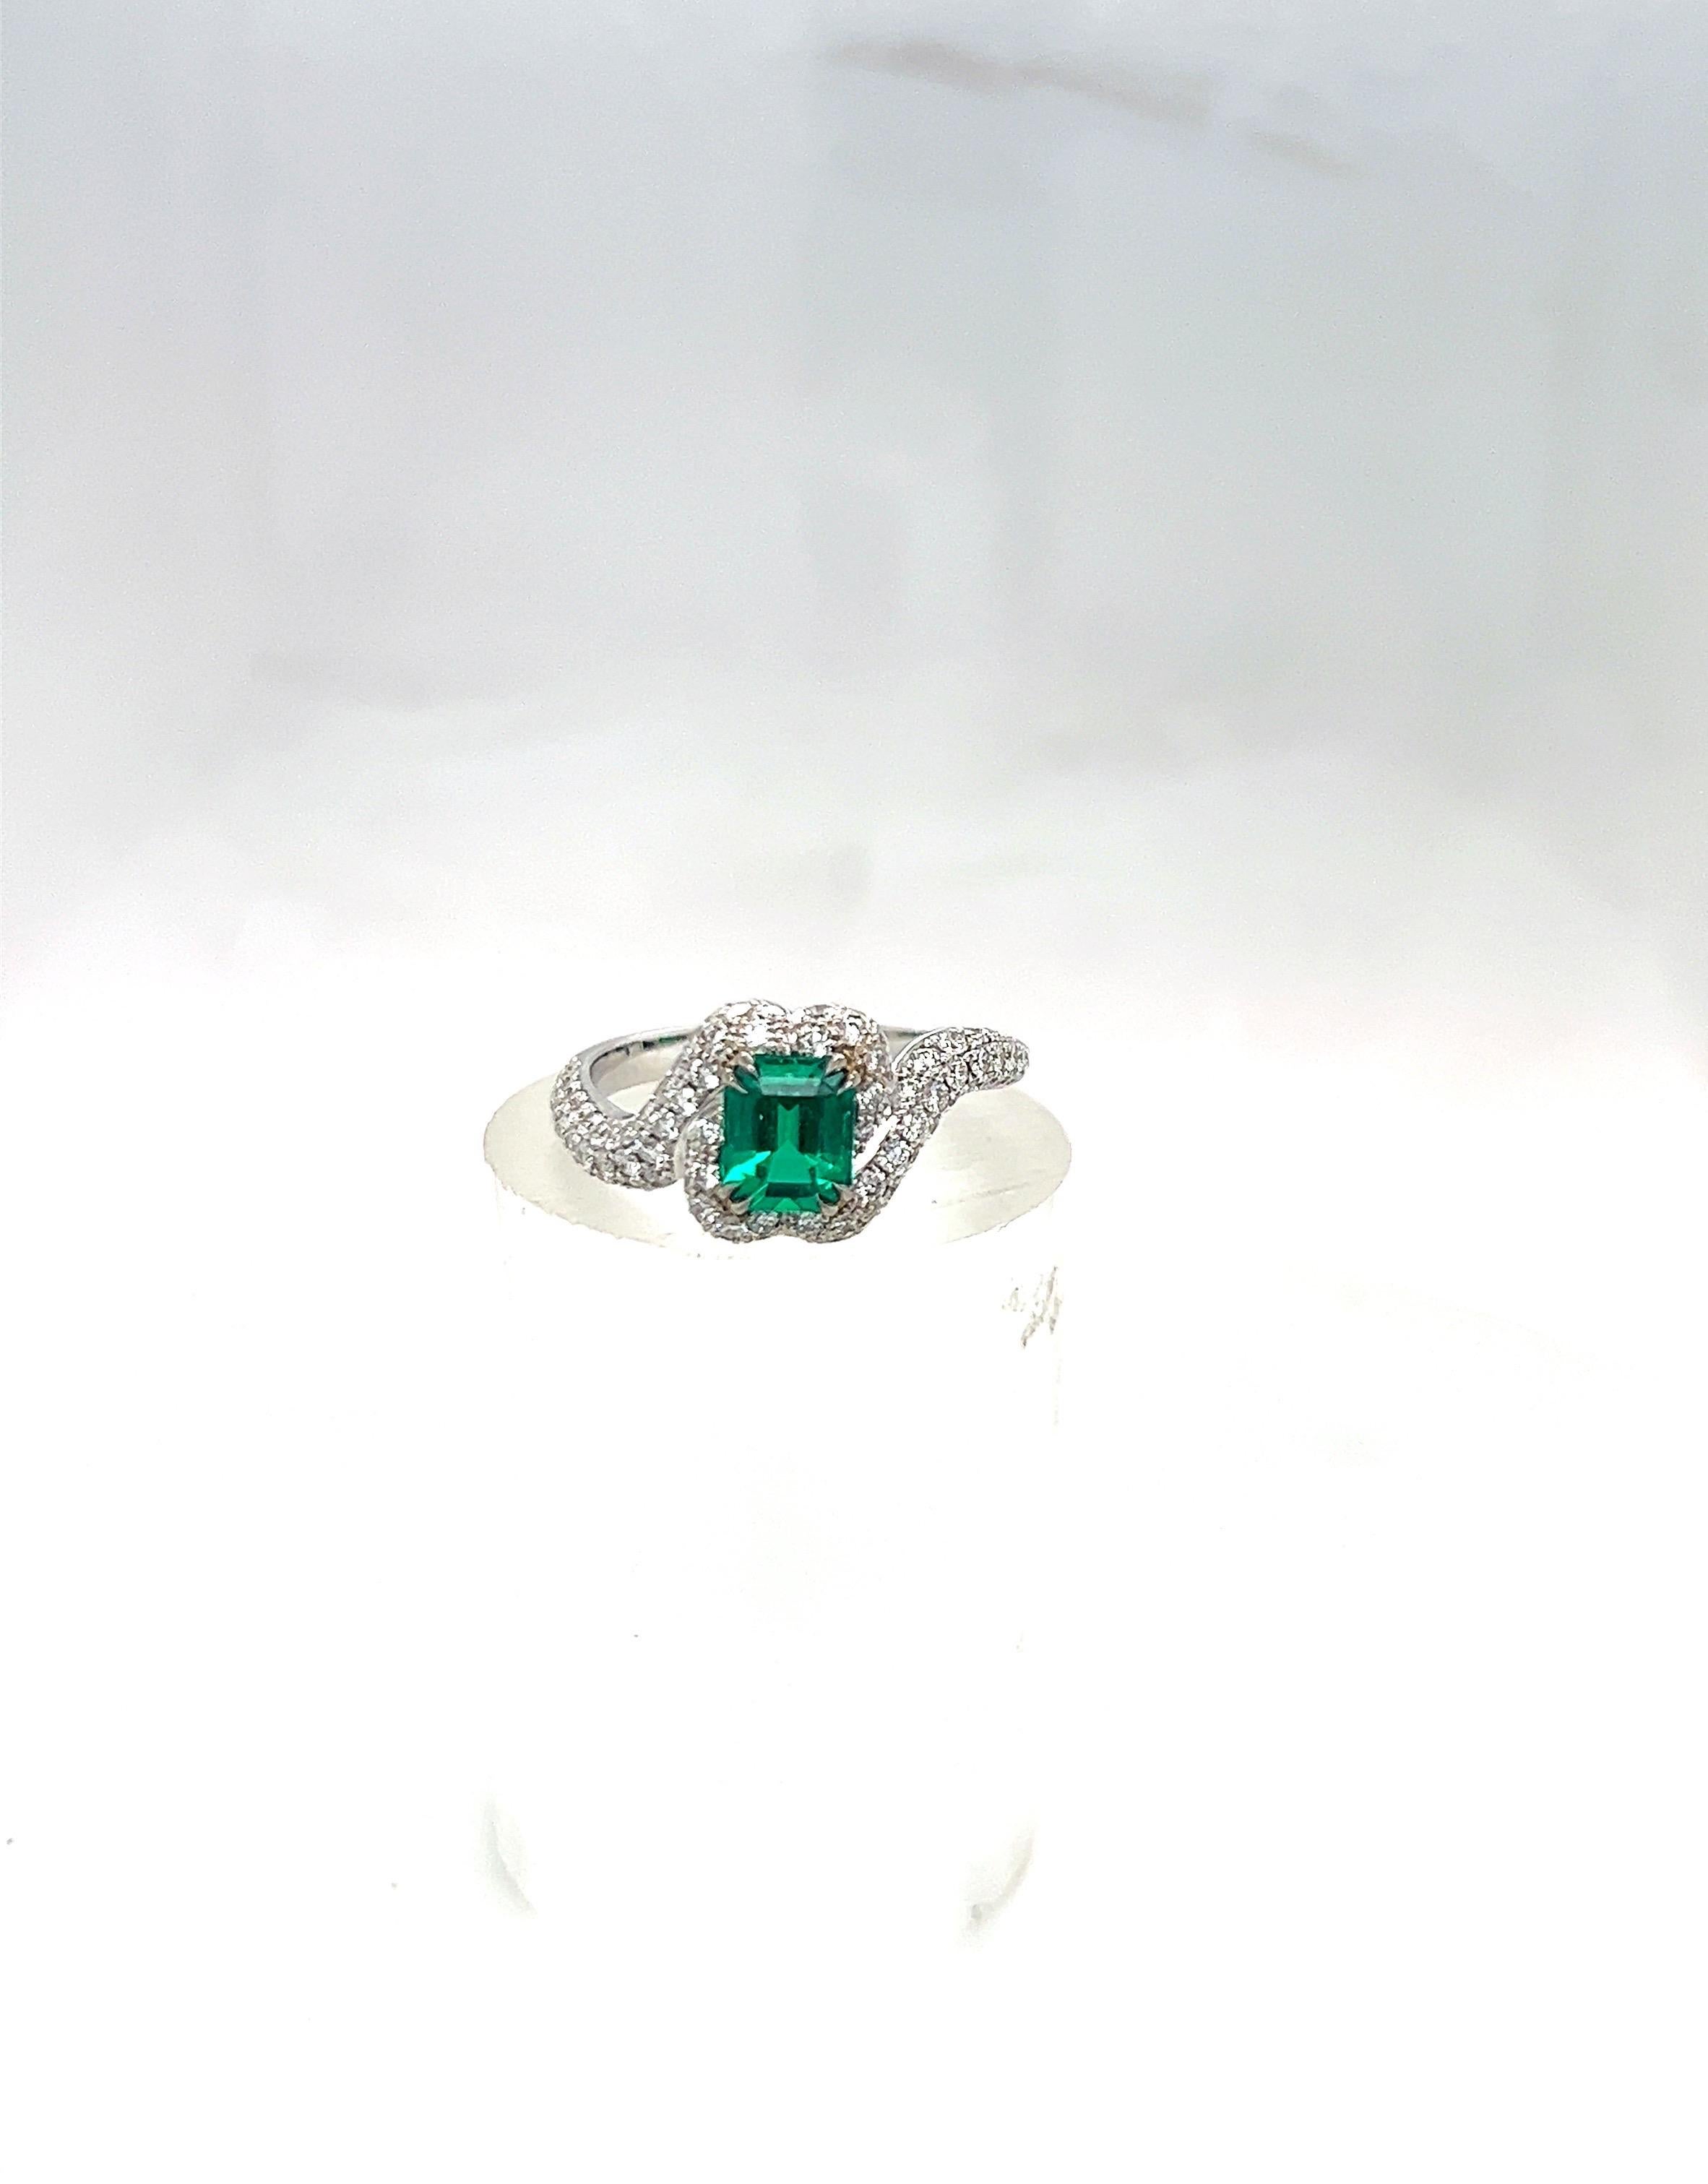 Modern 18 Karat White Gold 1.01 Ct Colombian Emerald and 1.01 Ct. Diamond Ring For Sale